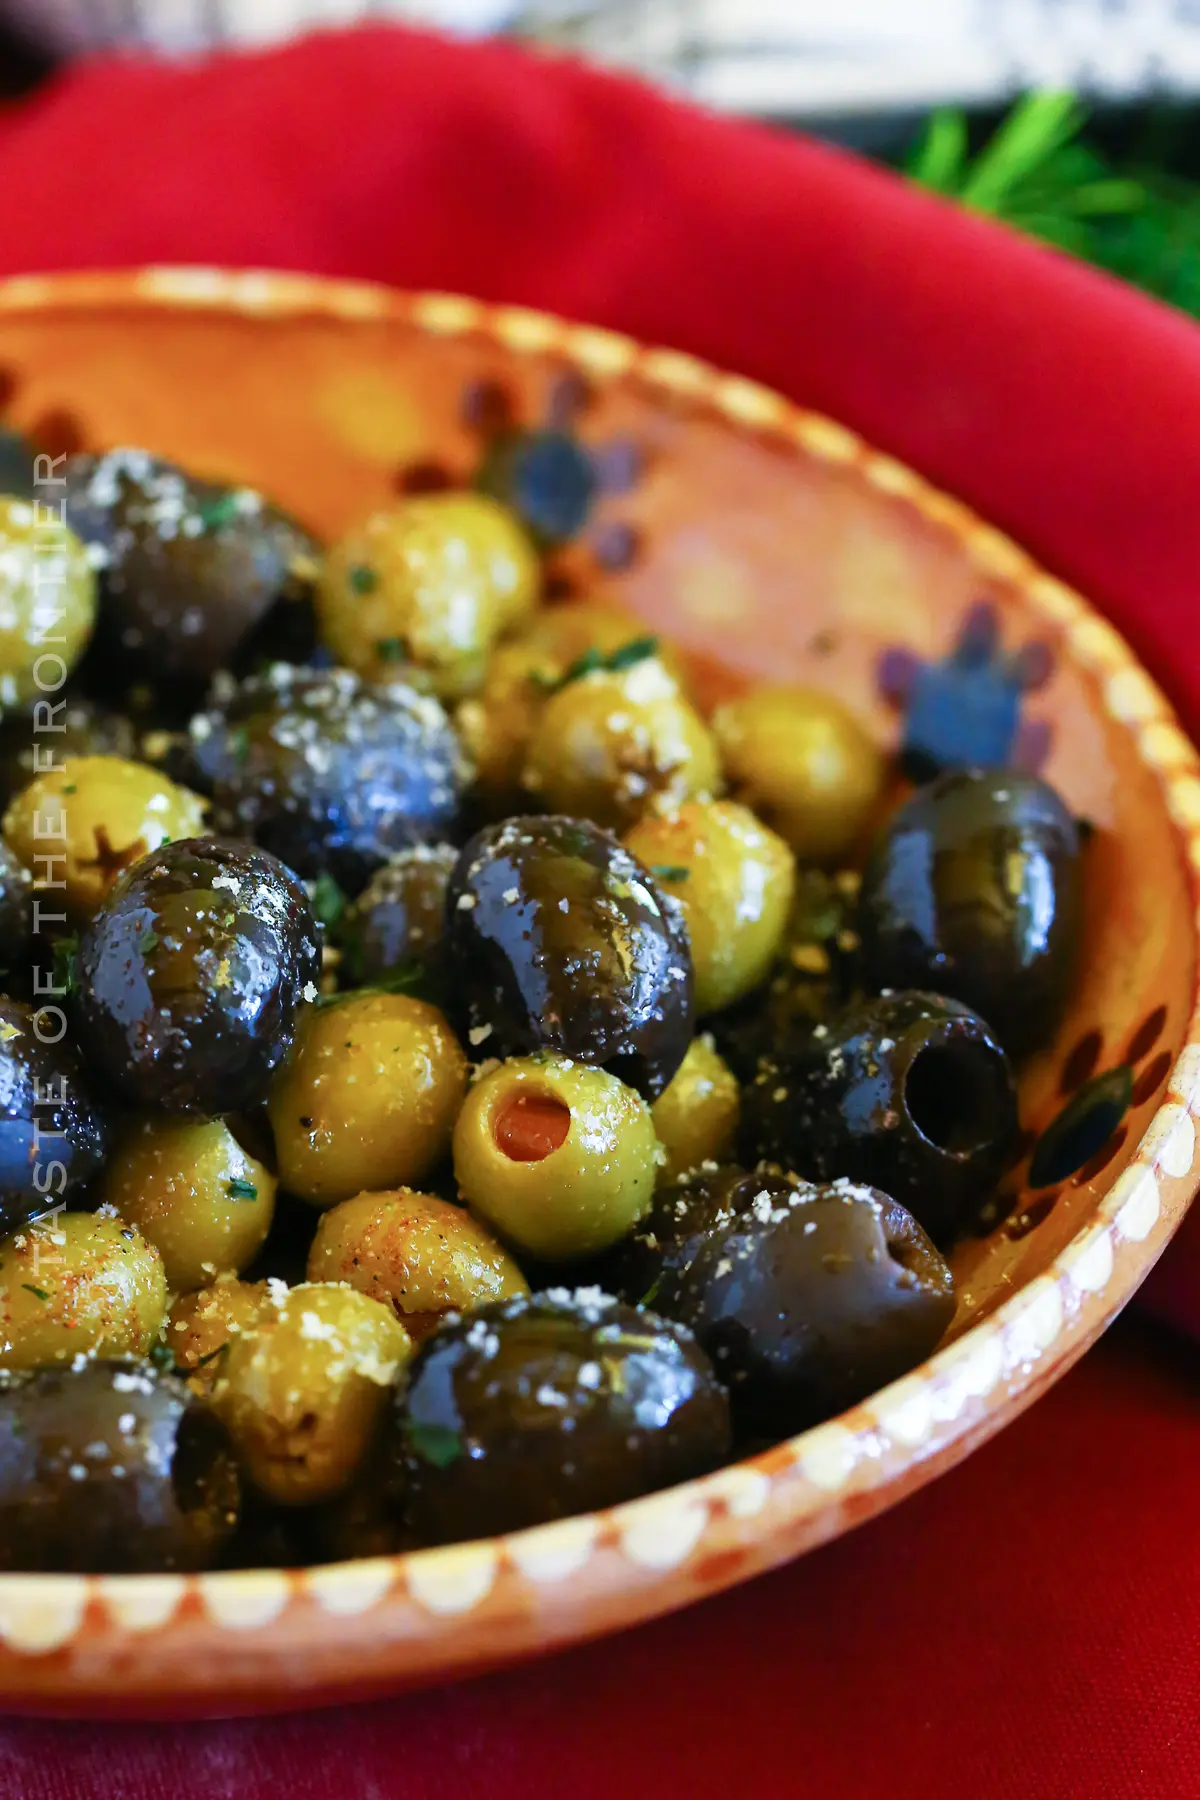 smoked olives - What is the best wood to smoke olives with